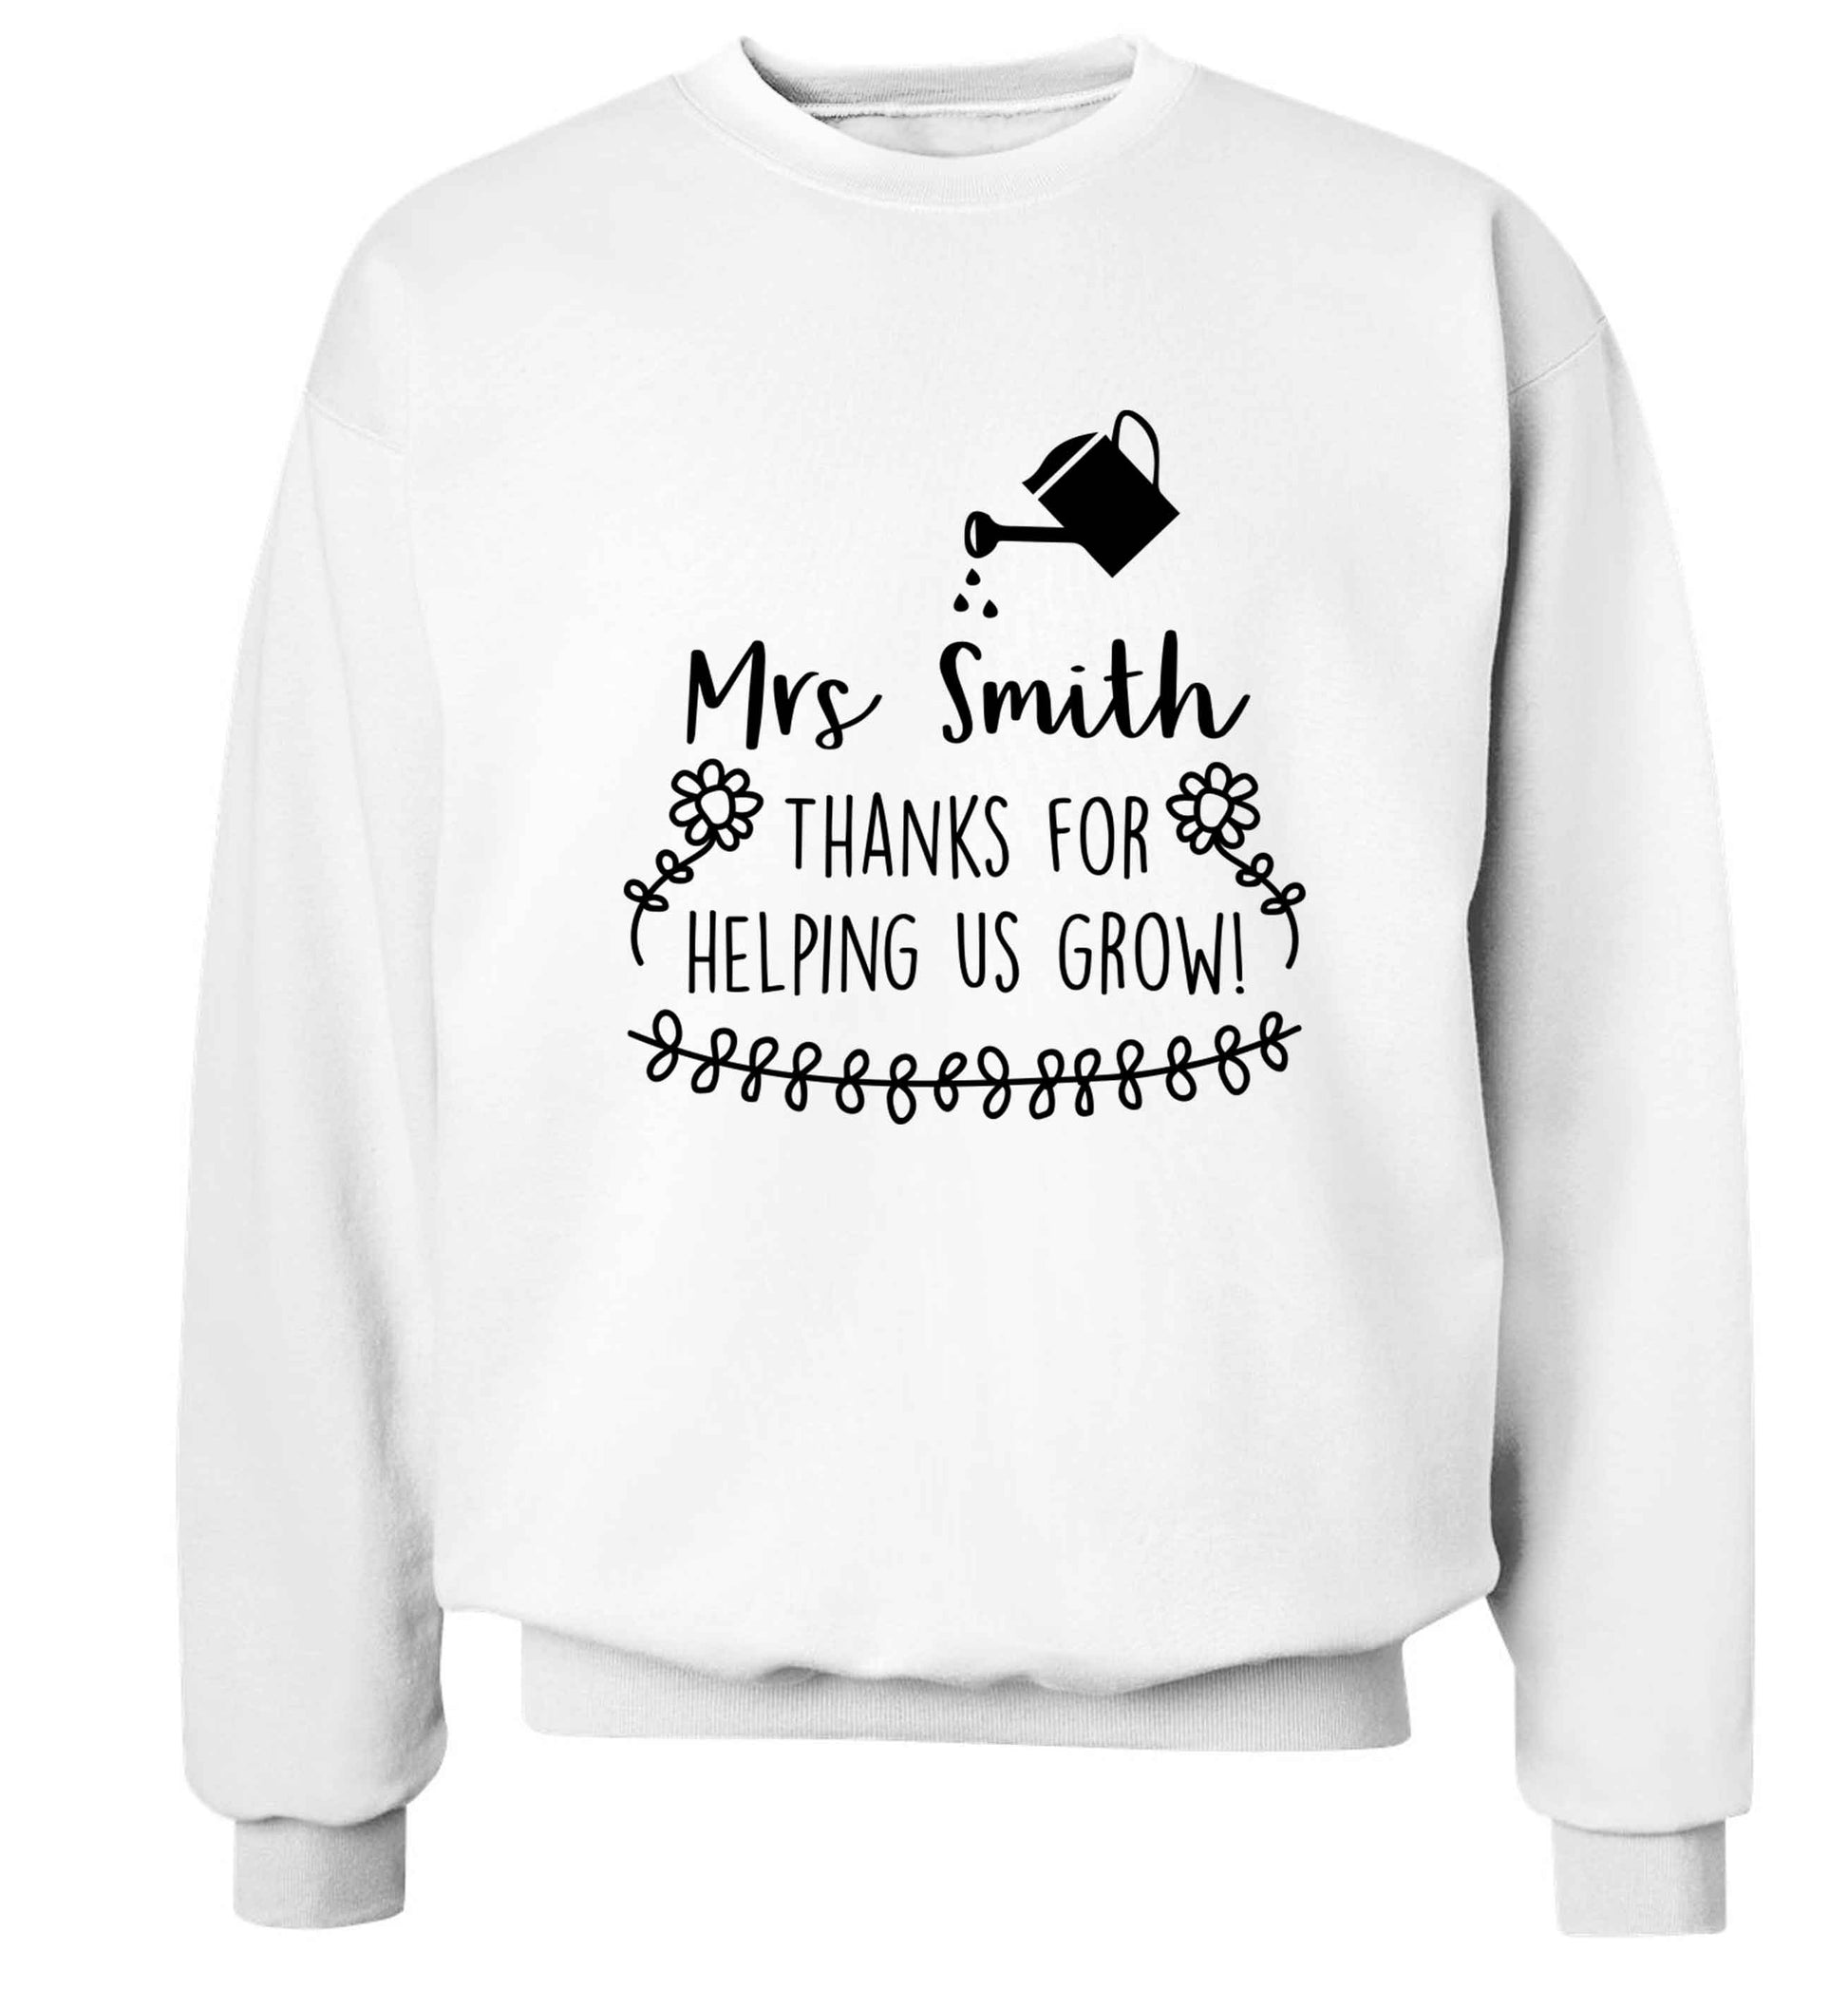 Personalised Mrs Smith thanks for helping us grow Adult's unisex white Sweater 2XL